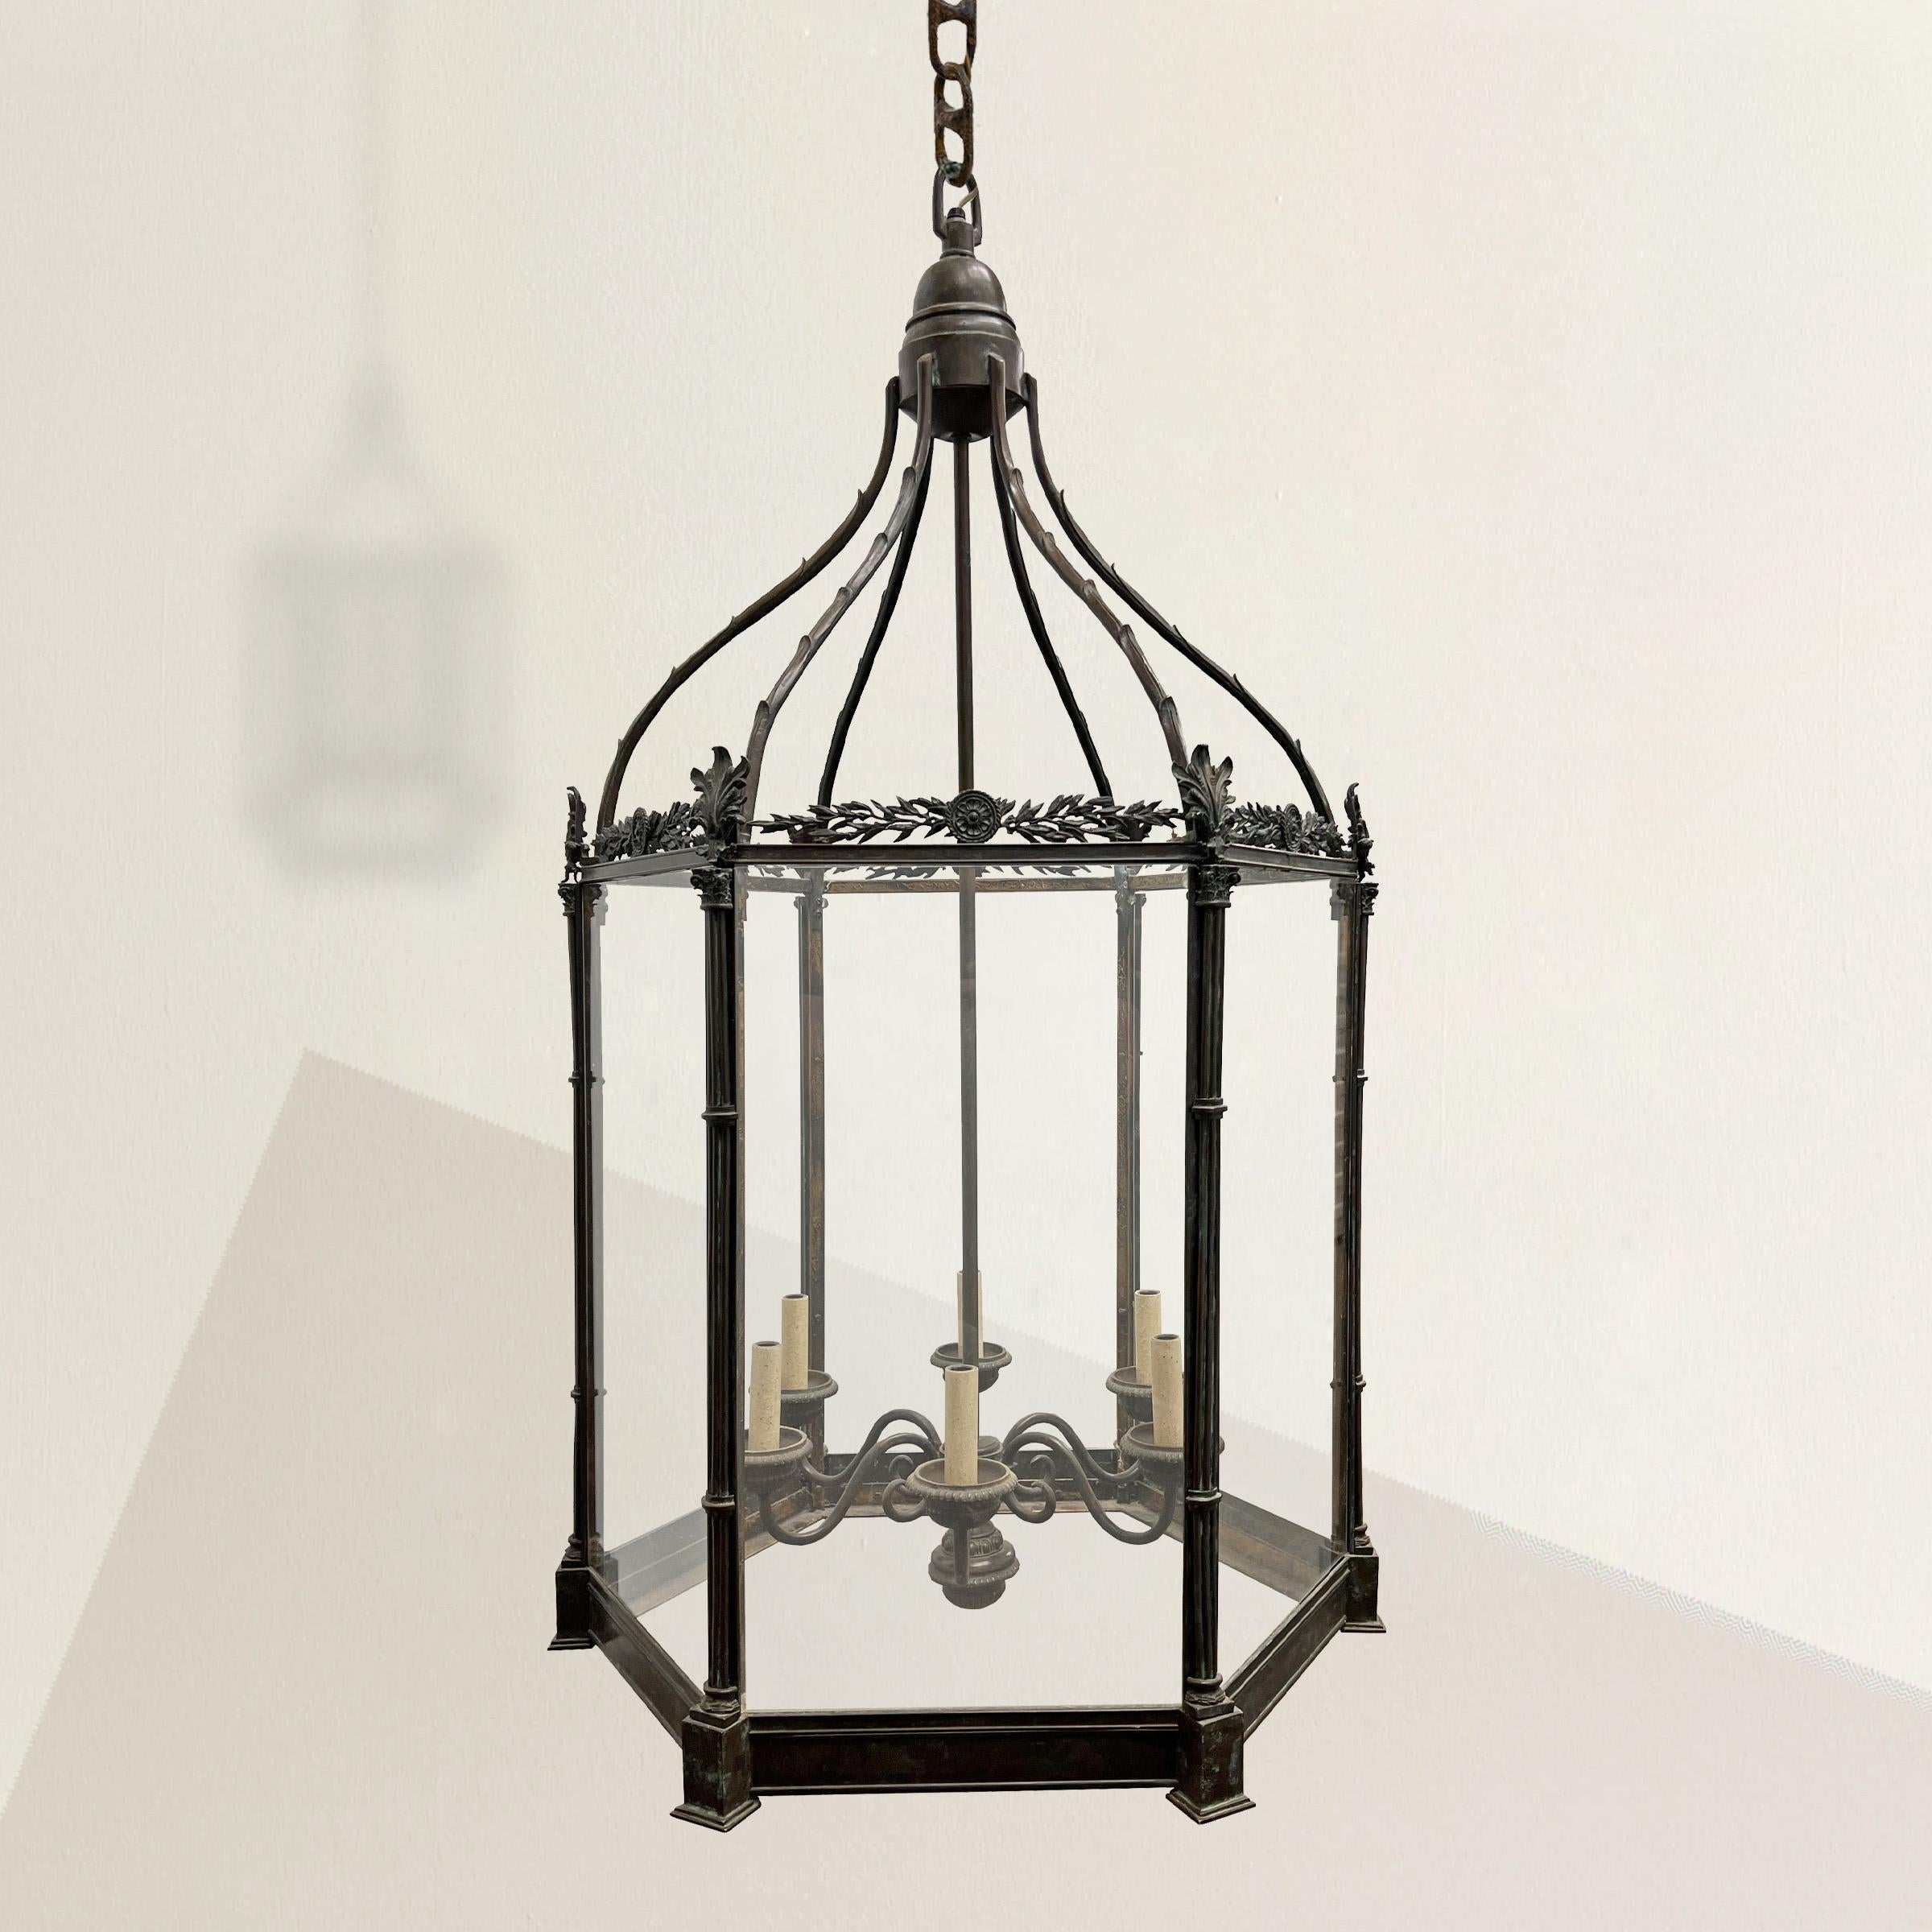 Step back in time to the elegant era of Regency England with this exquisite 20th century bronze lantern, a tribute to the refined tastes and architectural splendor of the period. Inspired by the visionary designs of renowned Regency architects, this